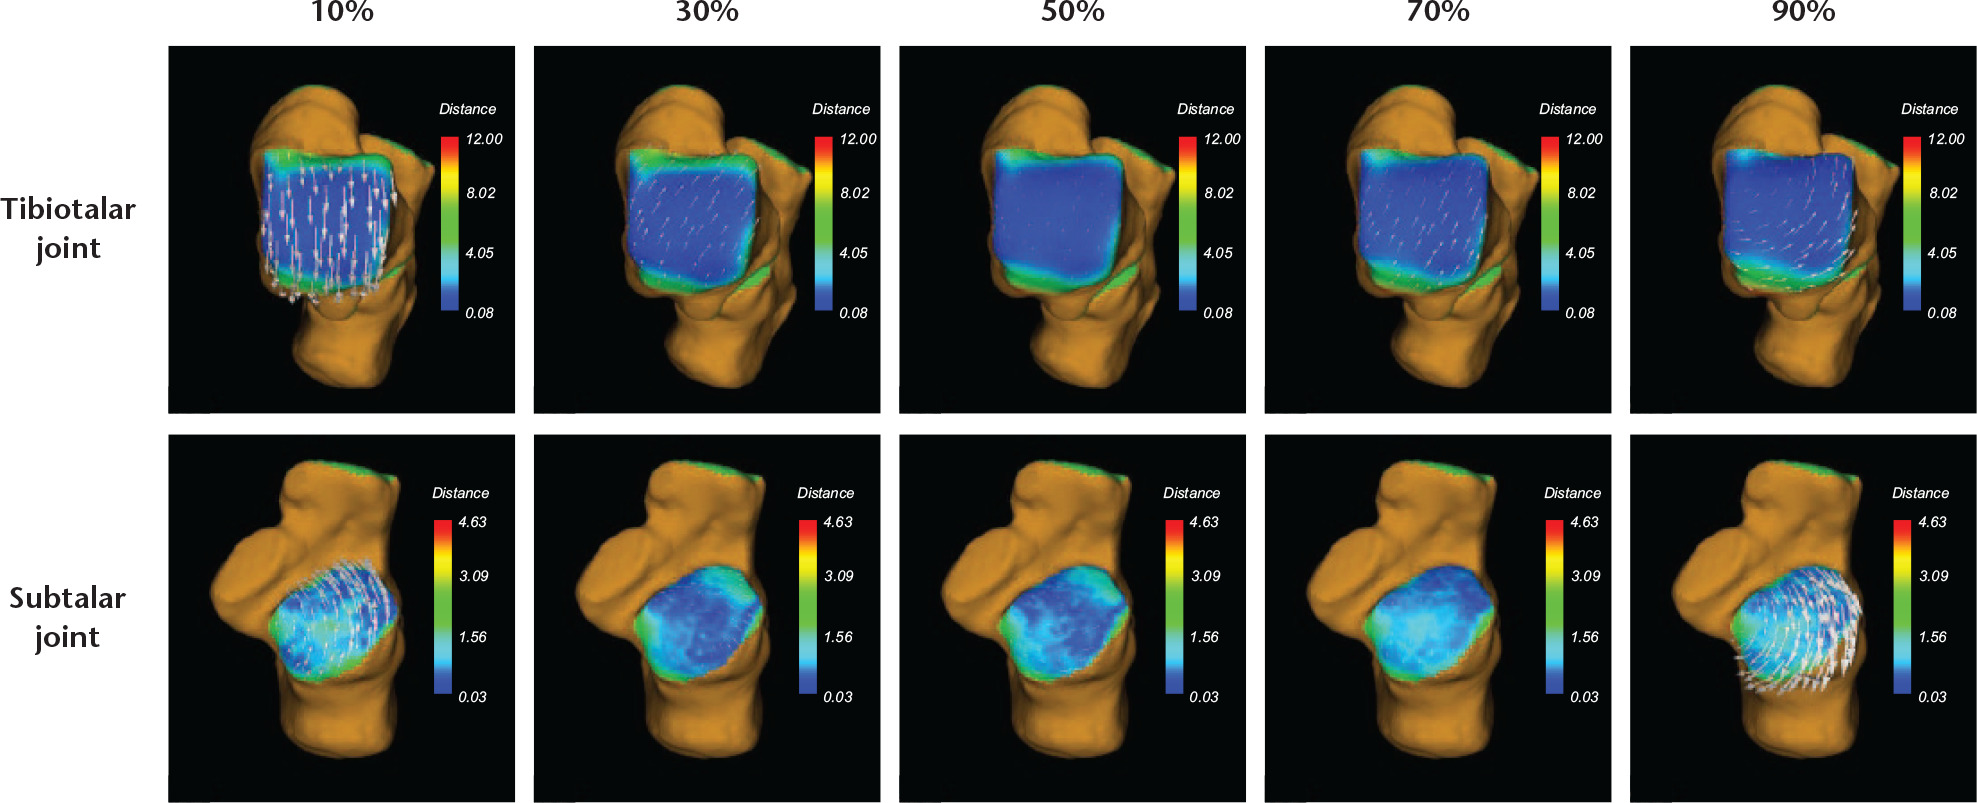 Fig. 4 
          Surface relative velocity vectors (SRVVs) in the talar dome (top row) and posterior facet of the calcaneus (bottom row) were calculated at 10% intervals to quantify the relative contact movements in the tibiotalar and subtalar joints during walking. Here, we presented the results only for the 10%, 30%, 50%, 70%, and 90% timepoints. The colours on the map represent distances on the contact surface.
        